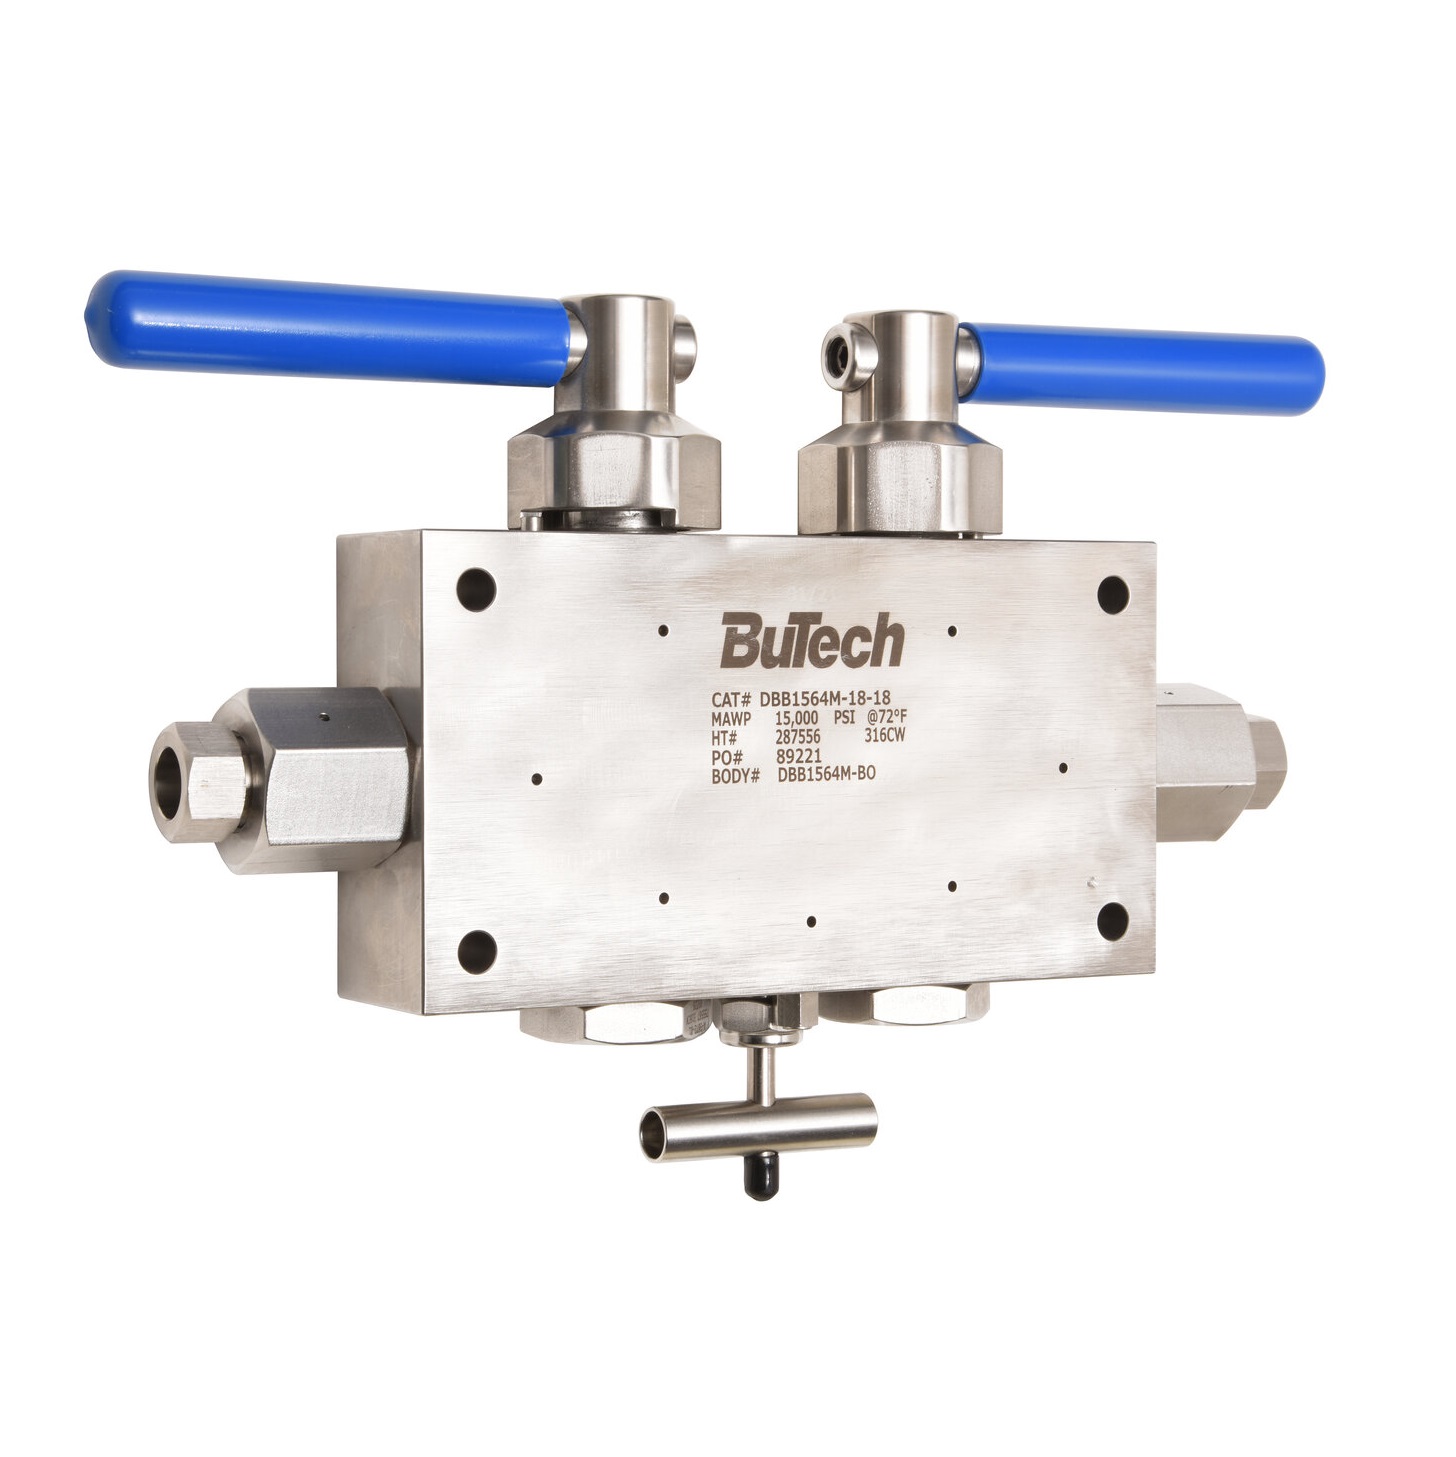 double-block-and-bleed-ball-valves